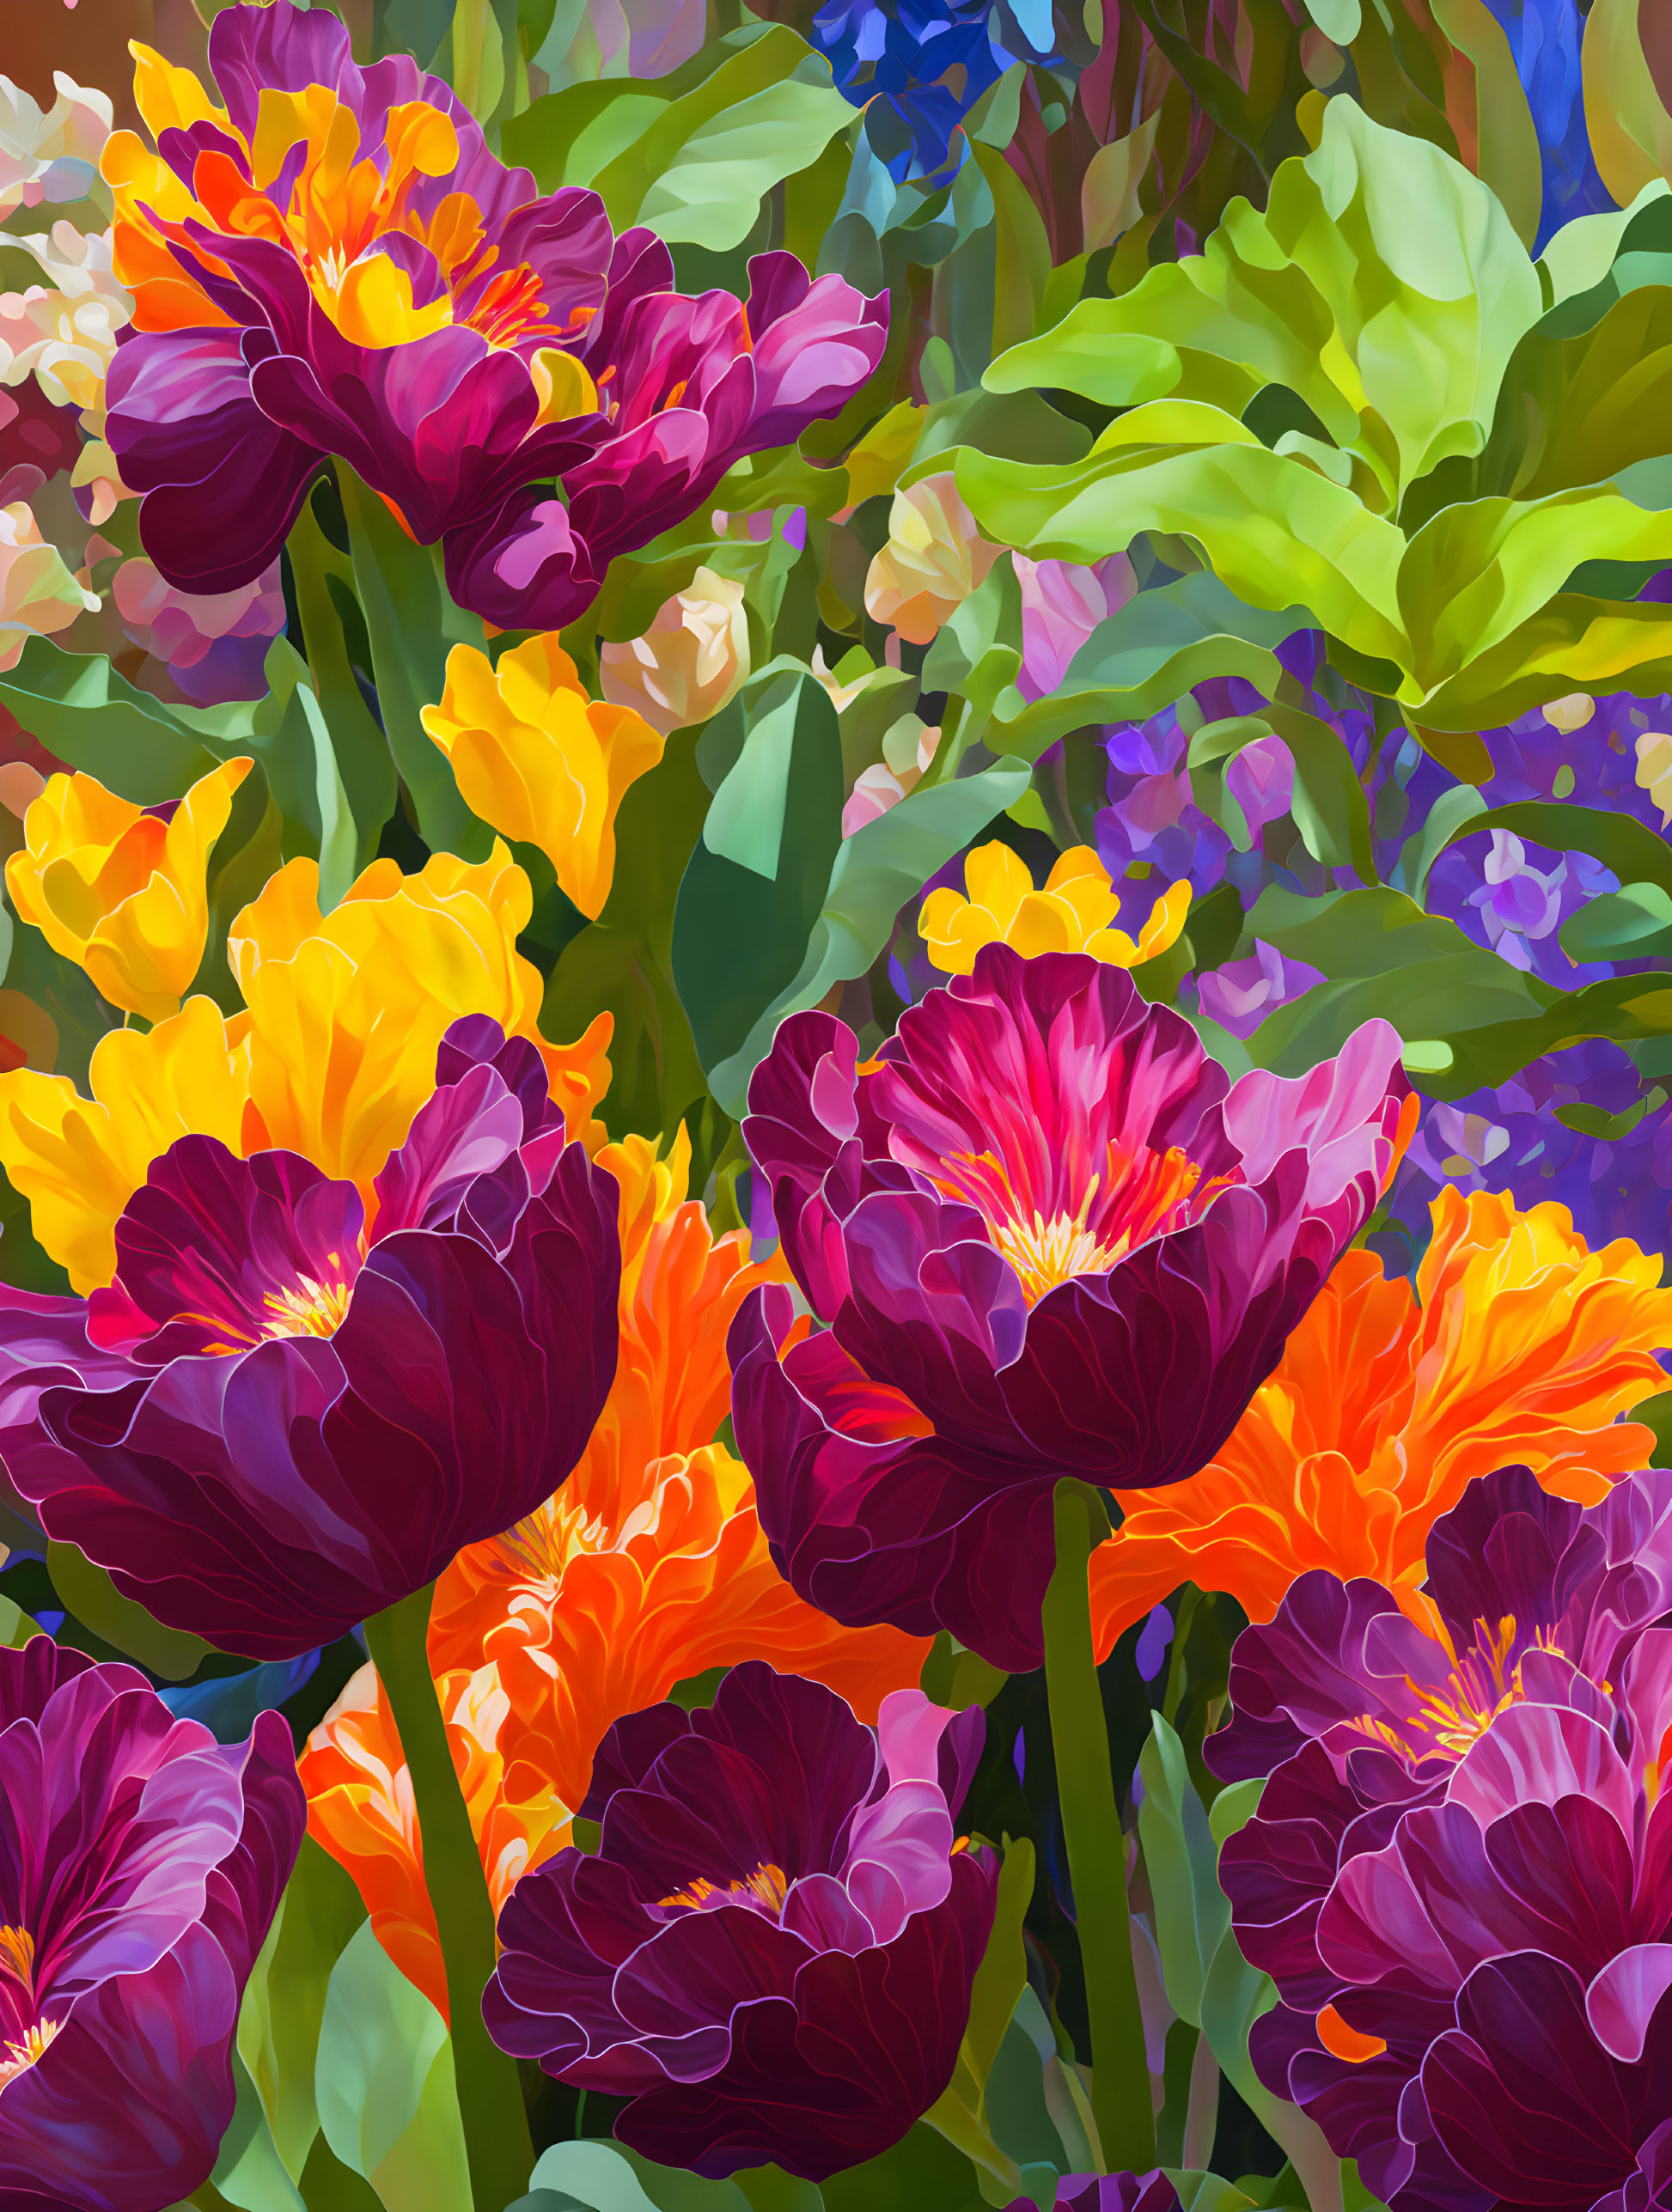 Colorful Digital Painting of Lush Tulips in Purples, Yellows, and Greens